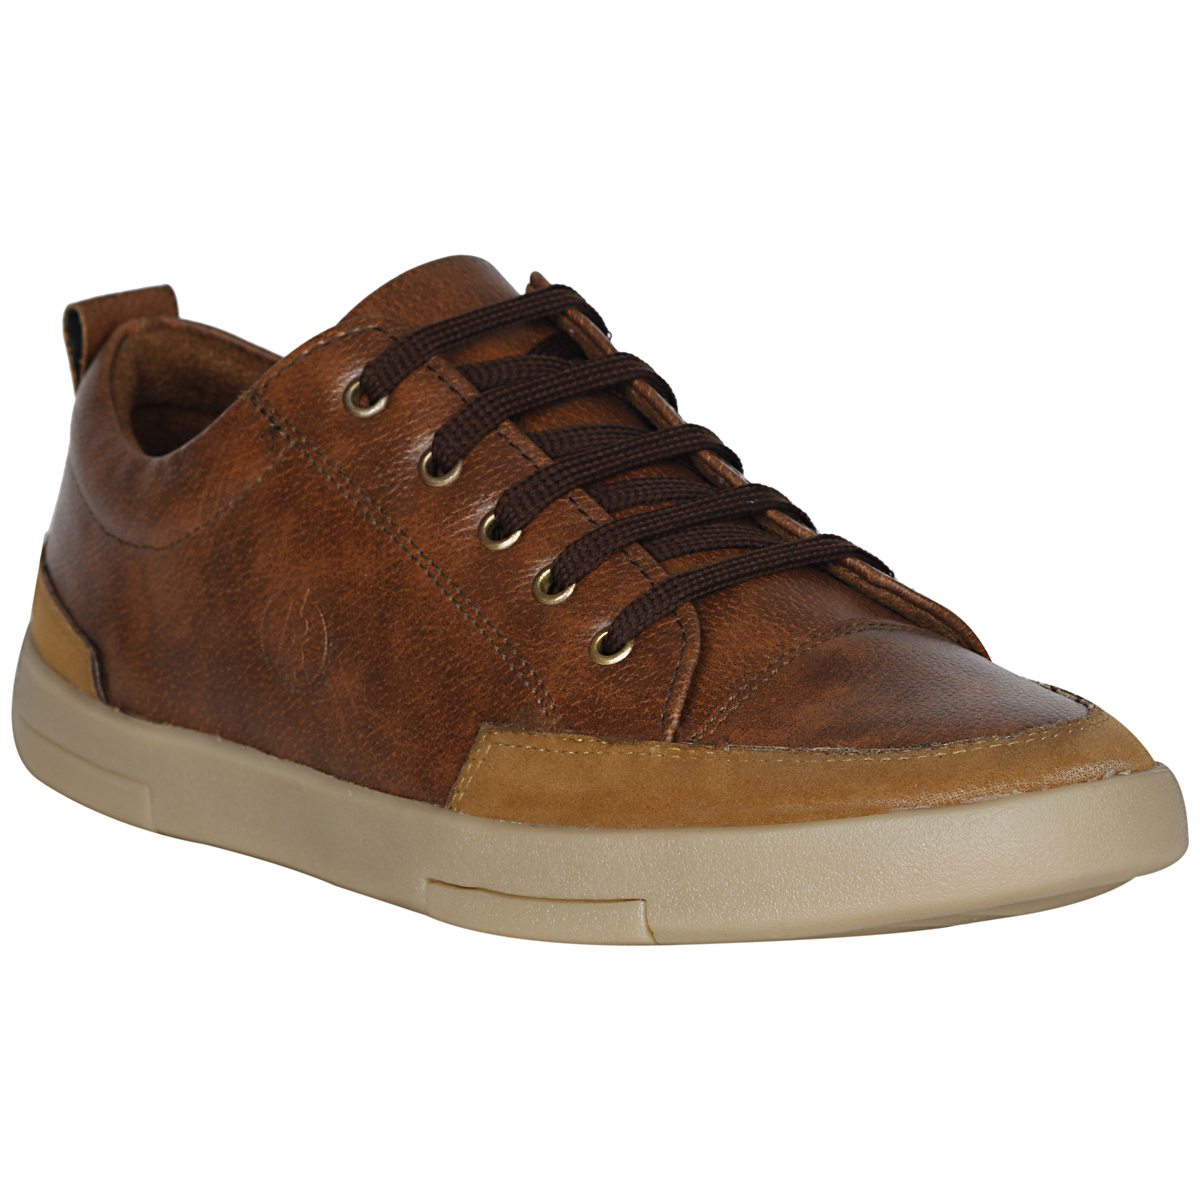 Buy Brutz Men's Brown Lace-up Sneakers Online @ ₹599 from ShopClues